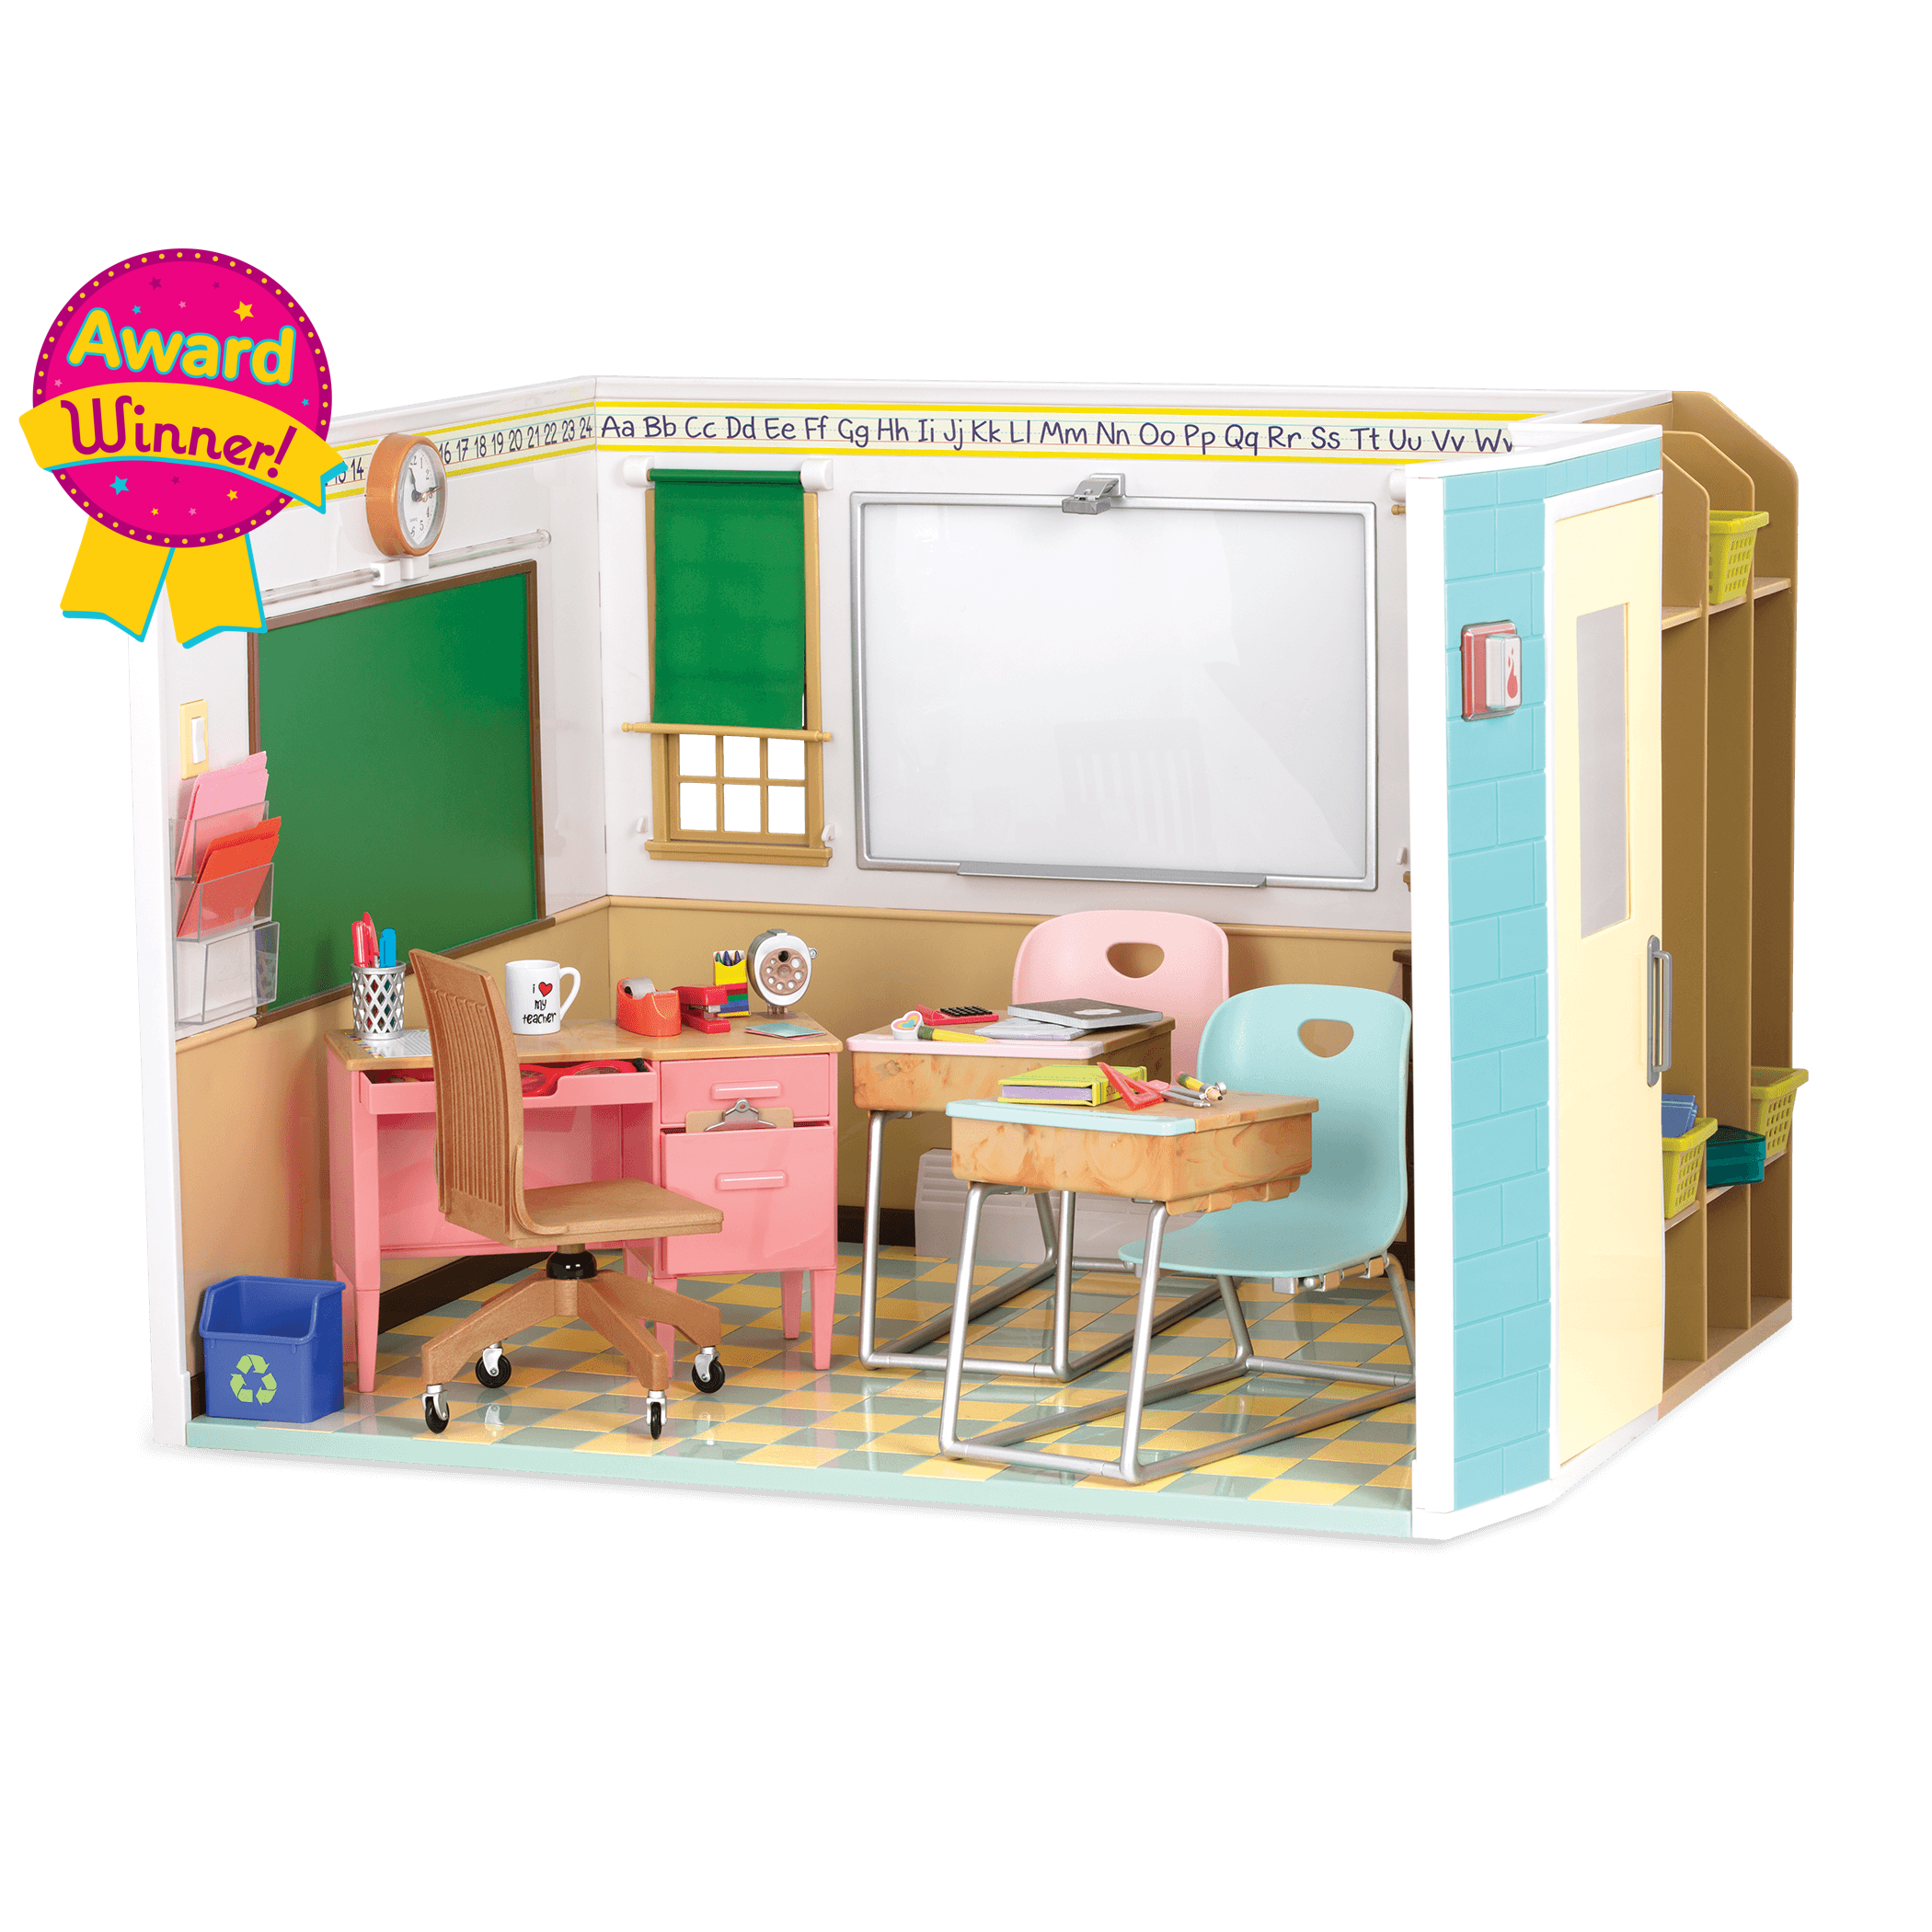 Awesome Academy school room playset for 18-inch dolls